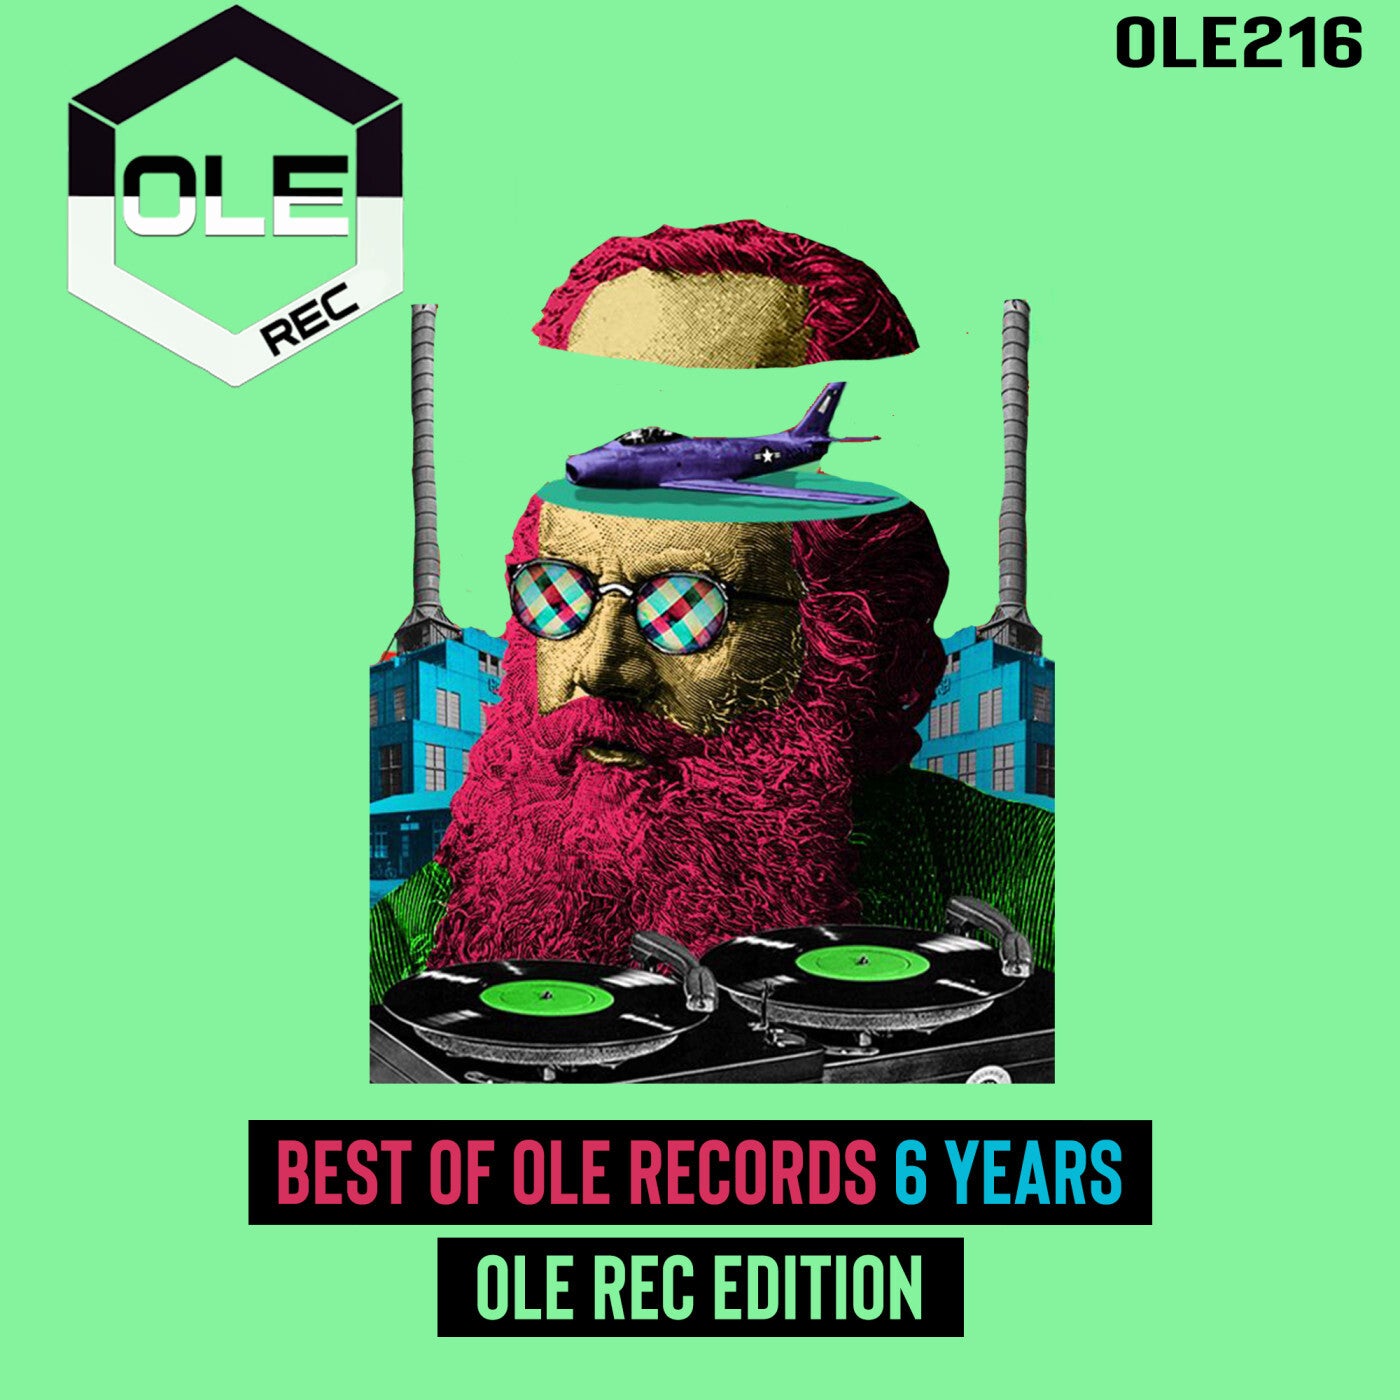 Best of Ole Records 6 Years